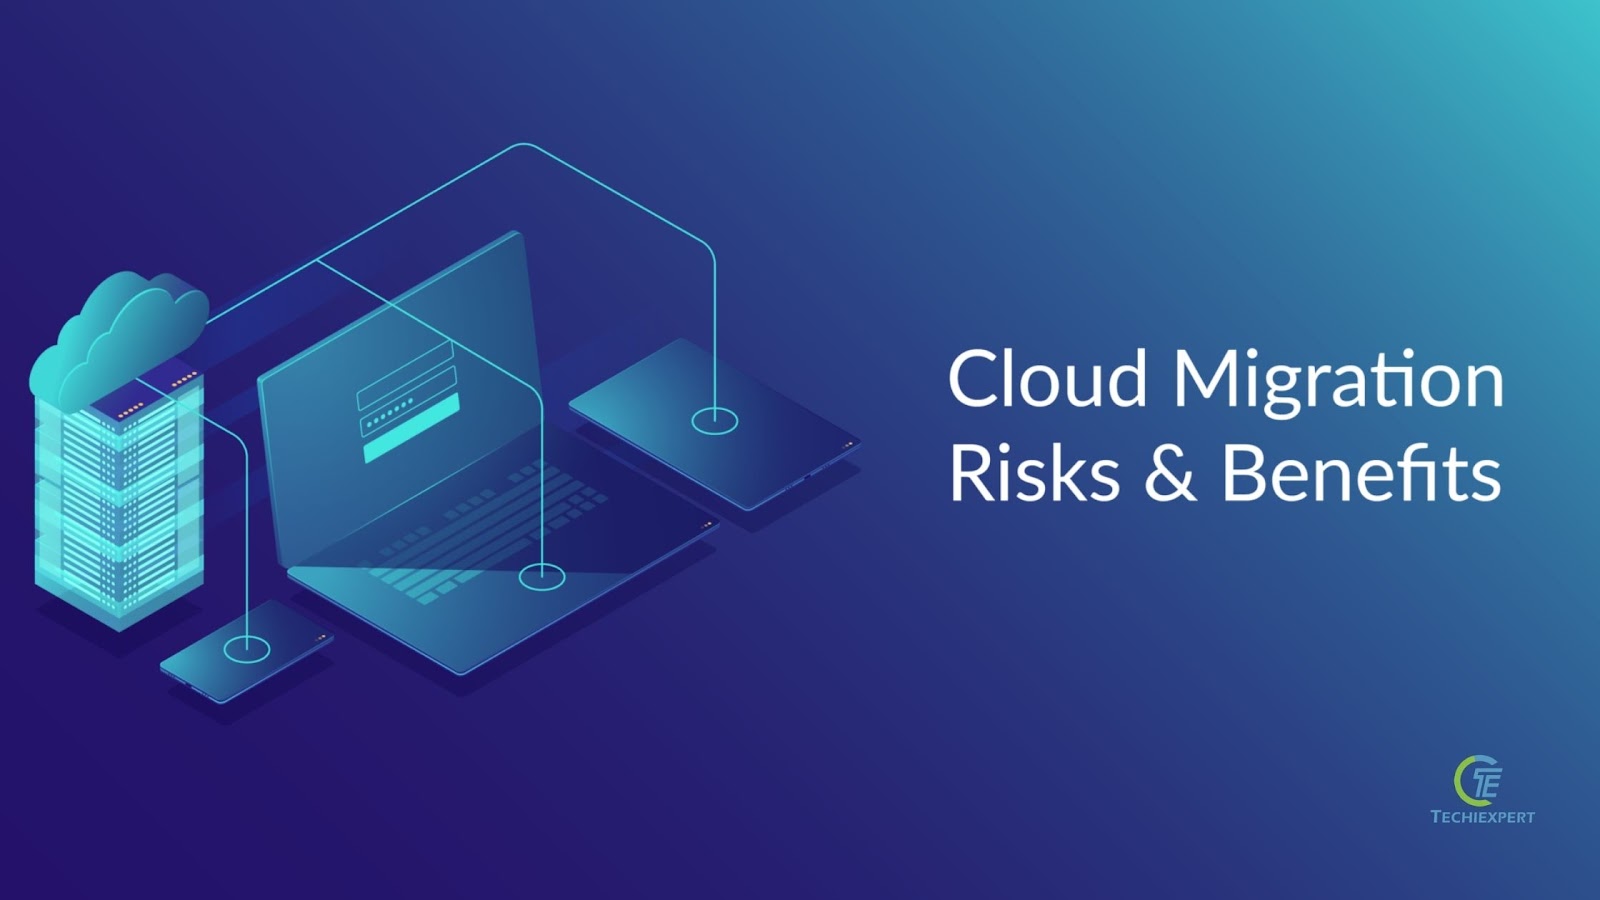 WHAT CAN CYBERSECURITY EXPERTS AND CONSUMERS DO TO MAXIMIZE THE Benefits of THE CLOUD AND MINIMIZE ITS DOWNSIDES?